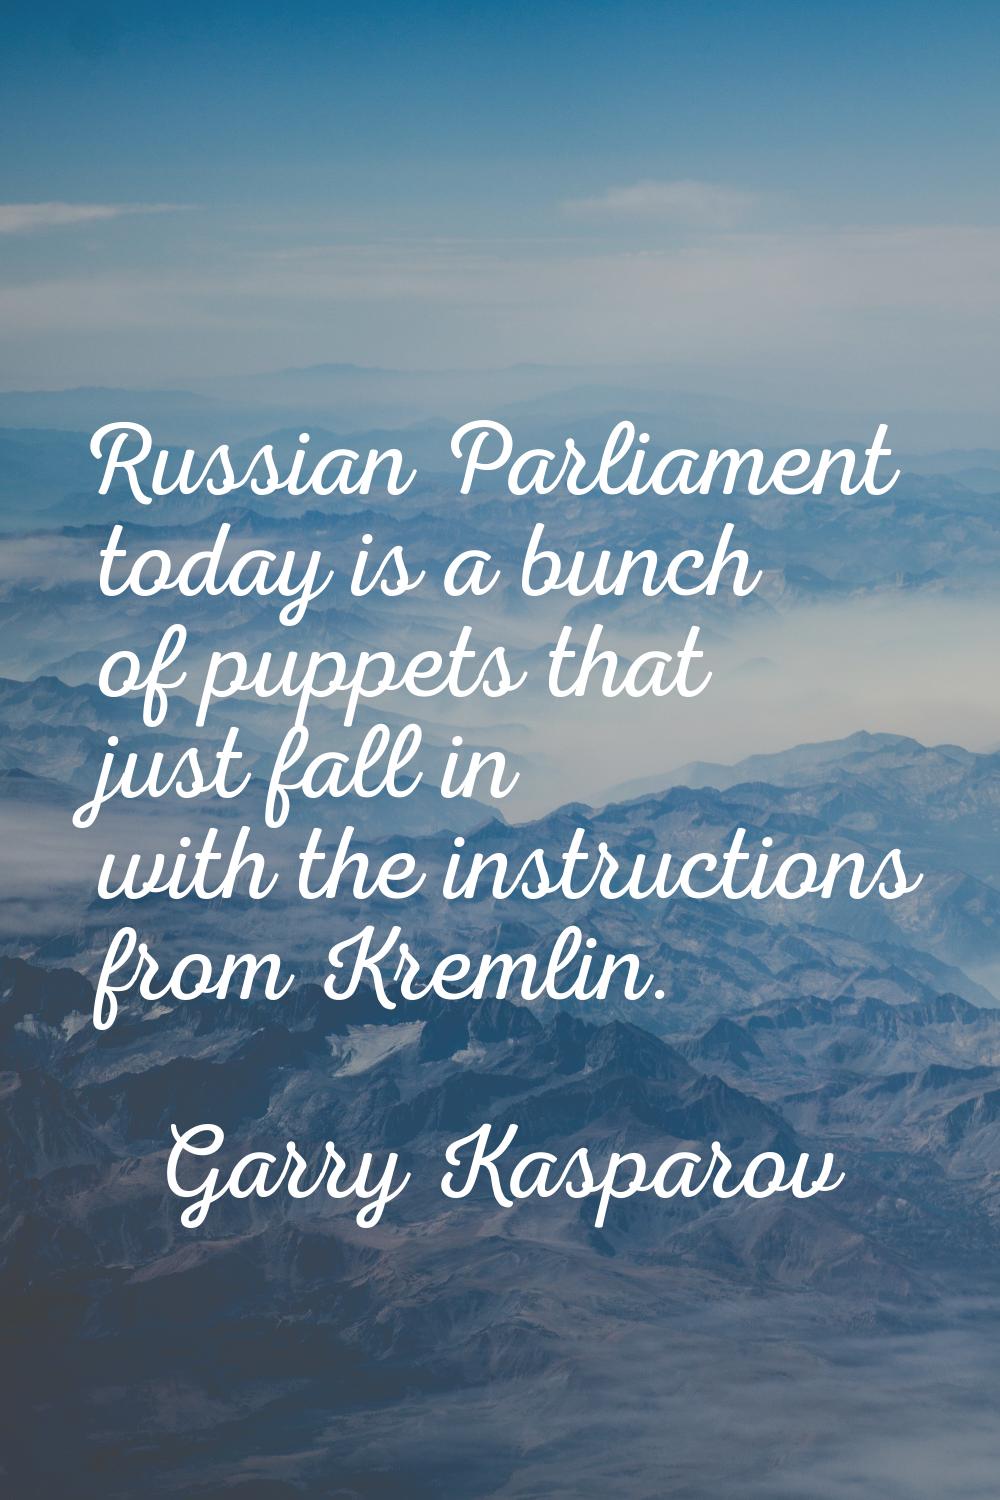 Russian Parliament today is a bunch of puppets that just fall in with the instructions from Kremlin